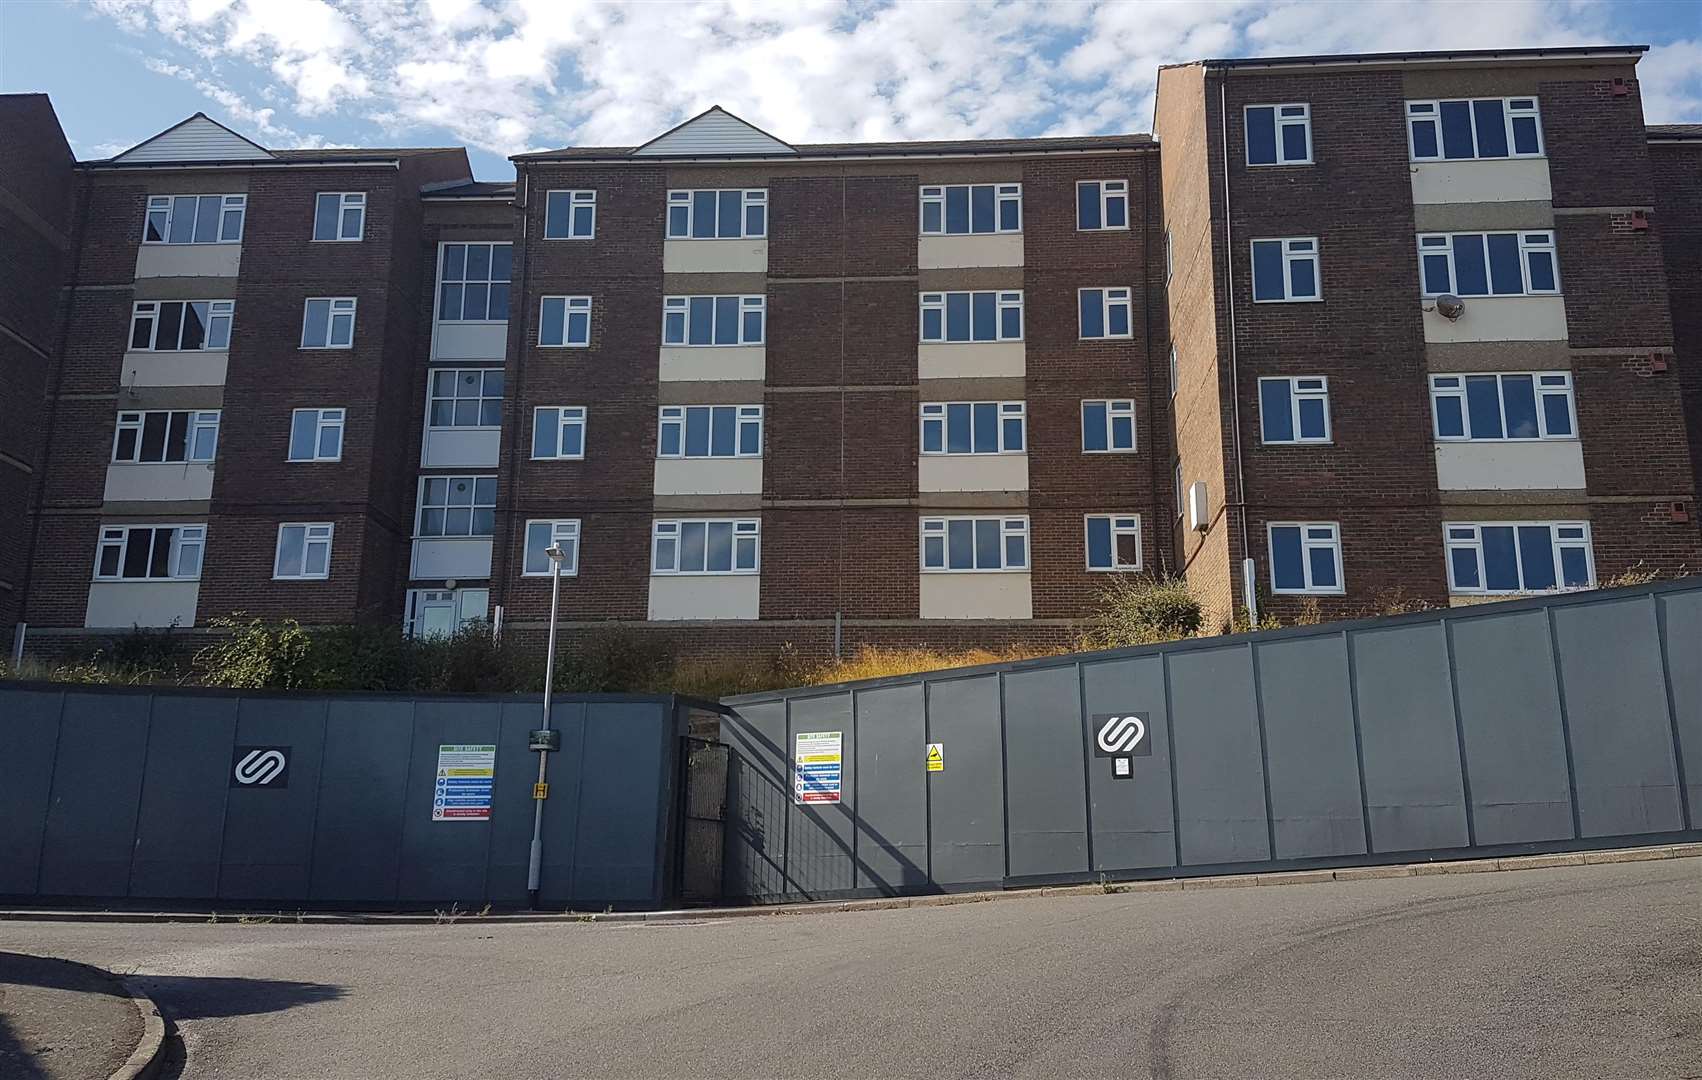 The flats to be demolished next month at Pilgrim Spring